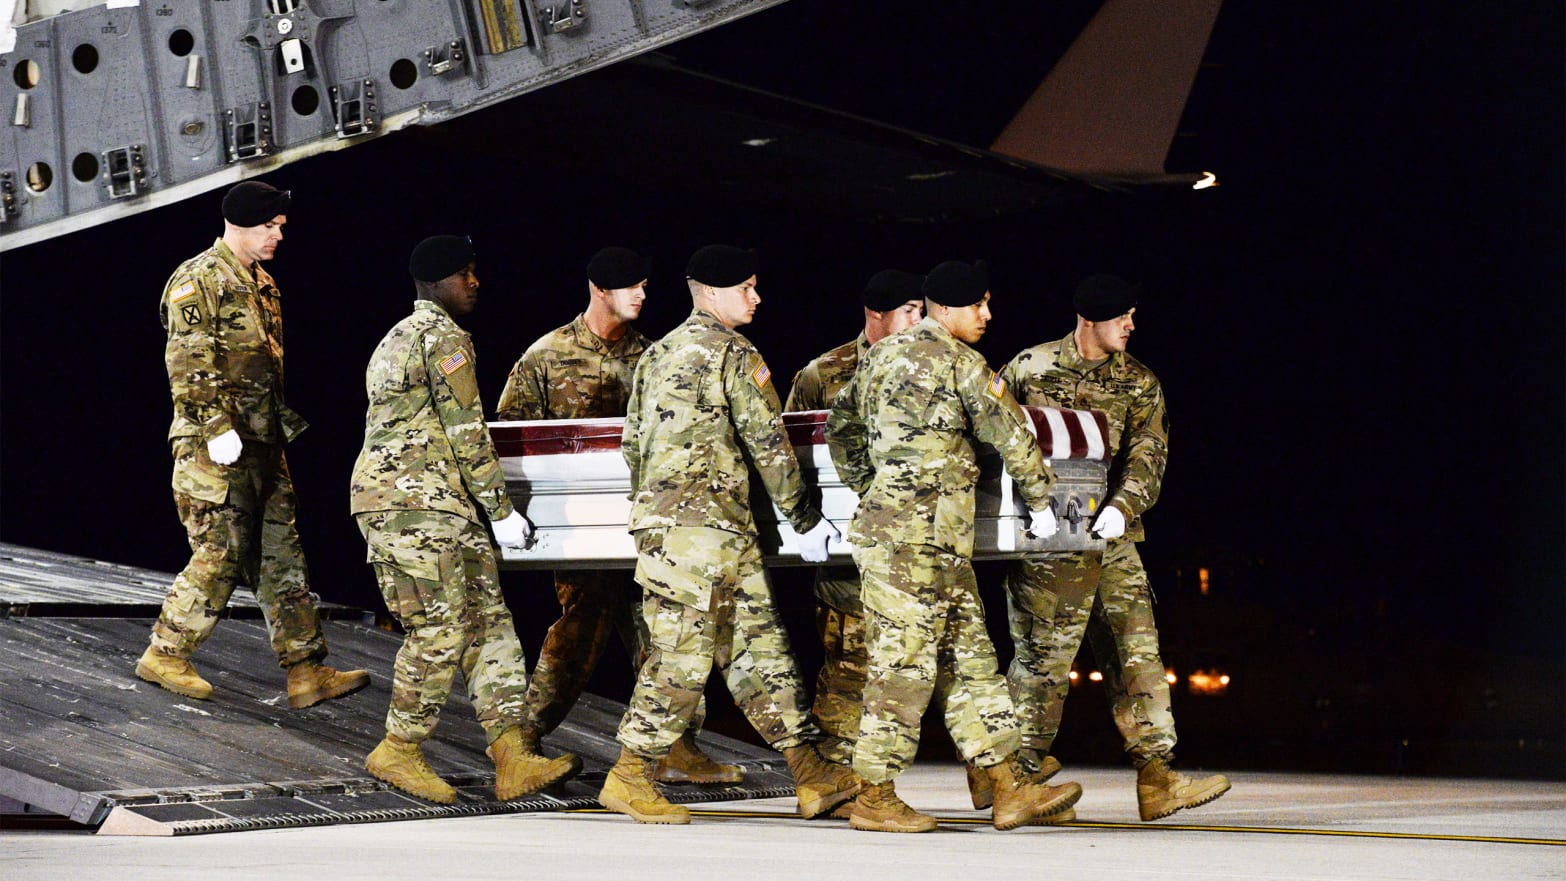 The Four Biggest Questions About The Deadly Niger Firefight